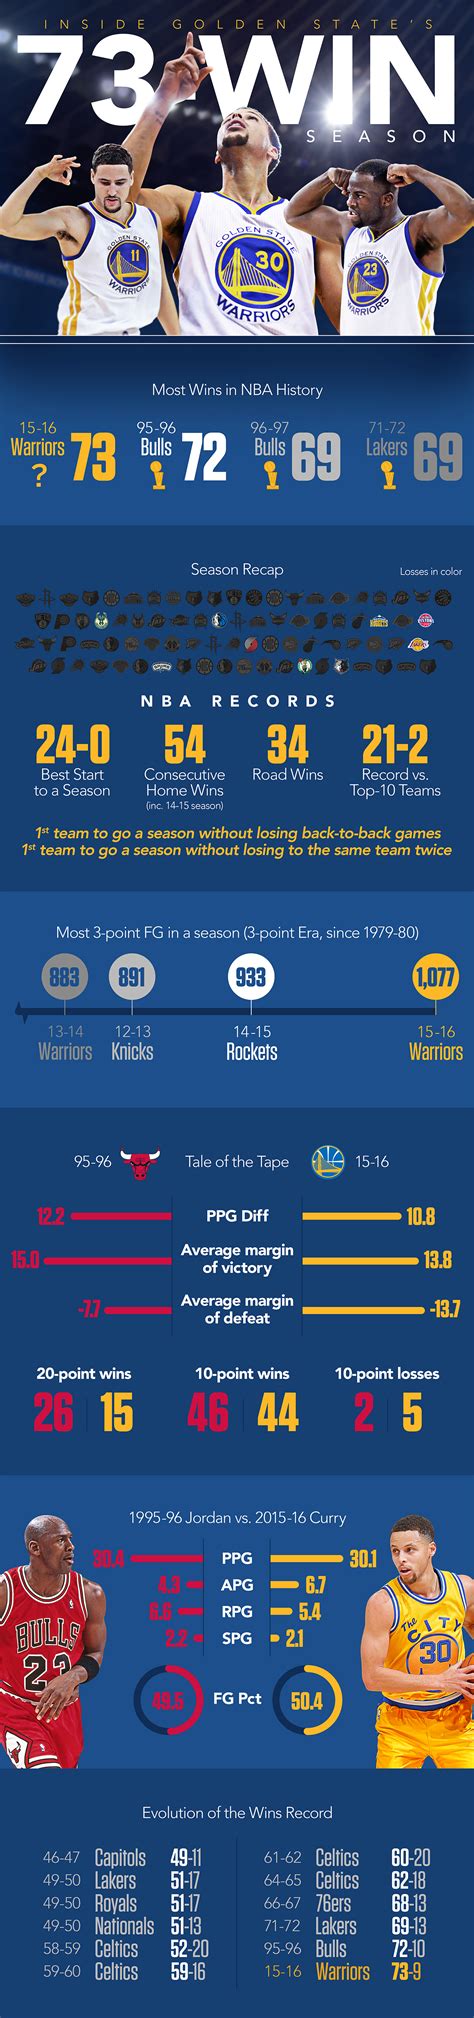 golden state warriors game stats